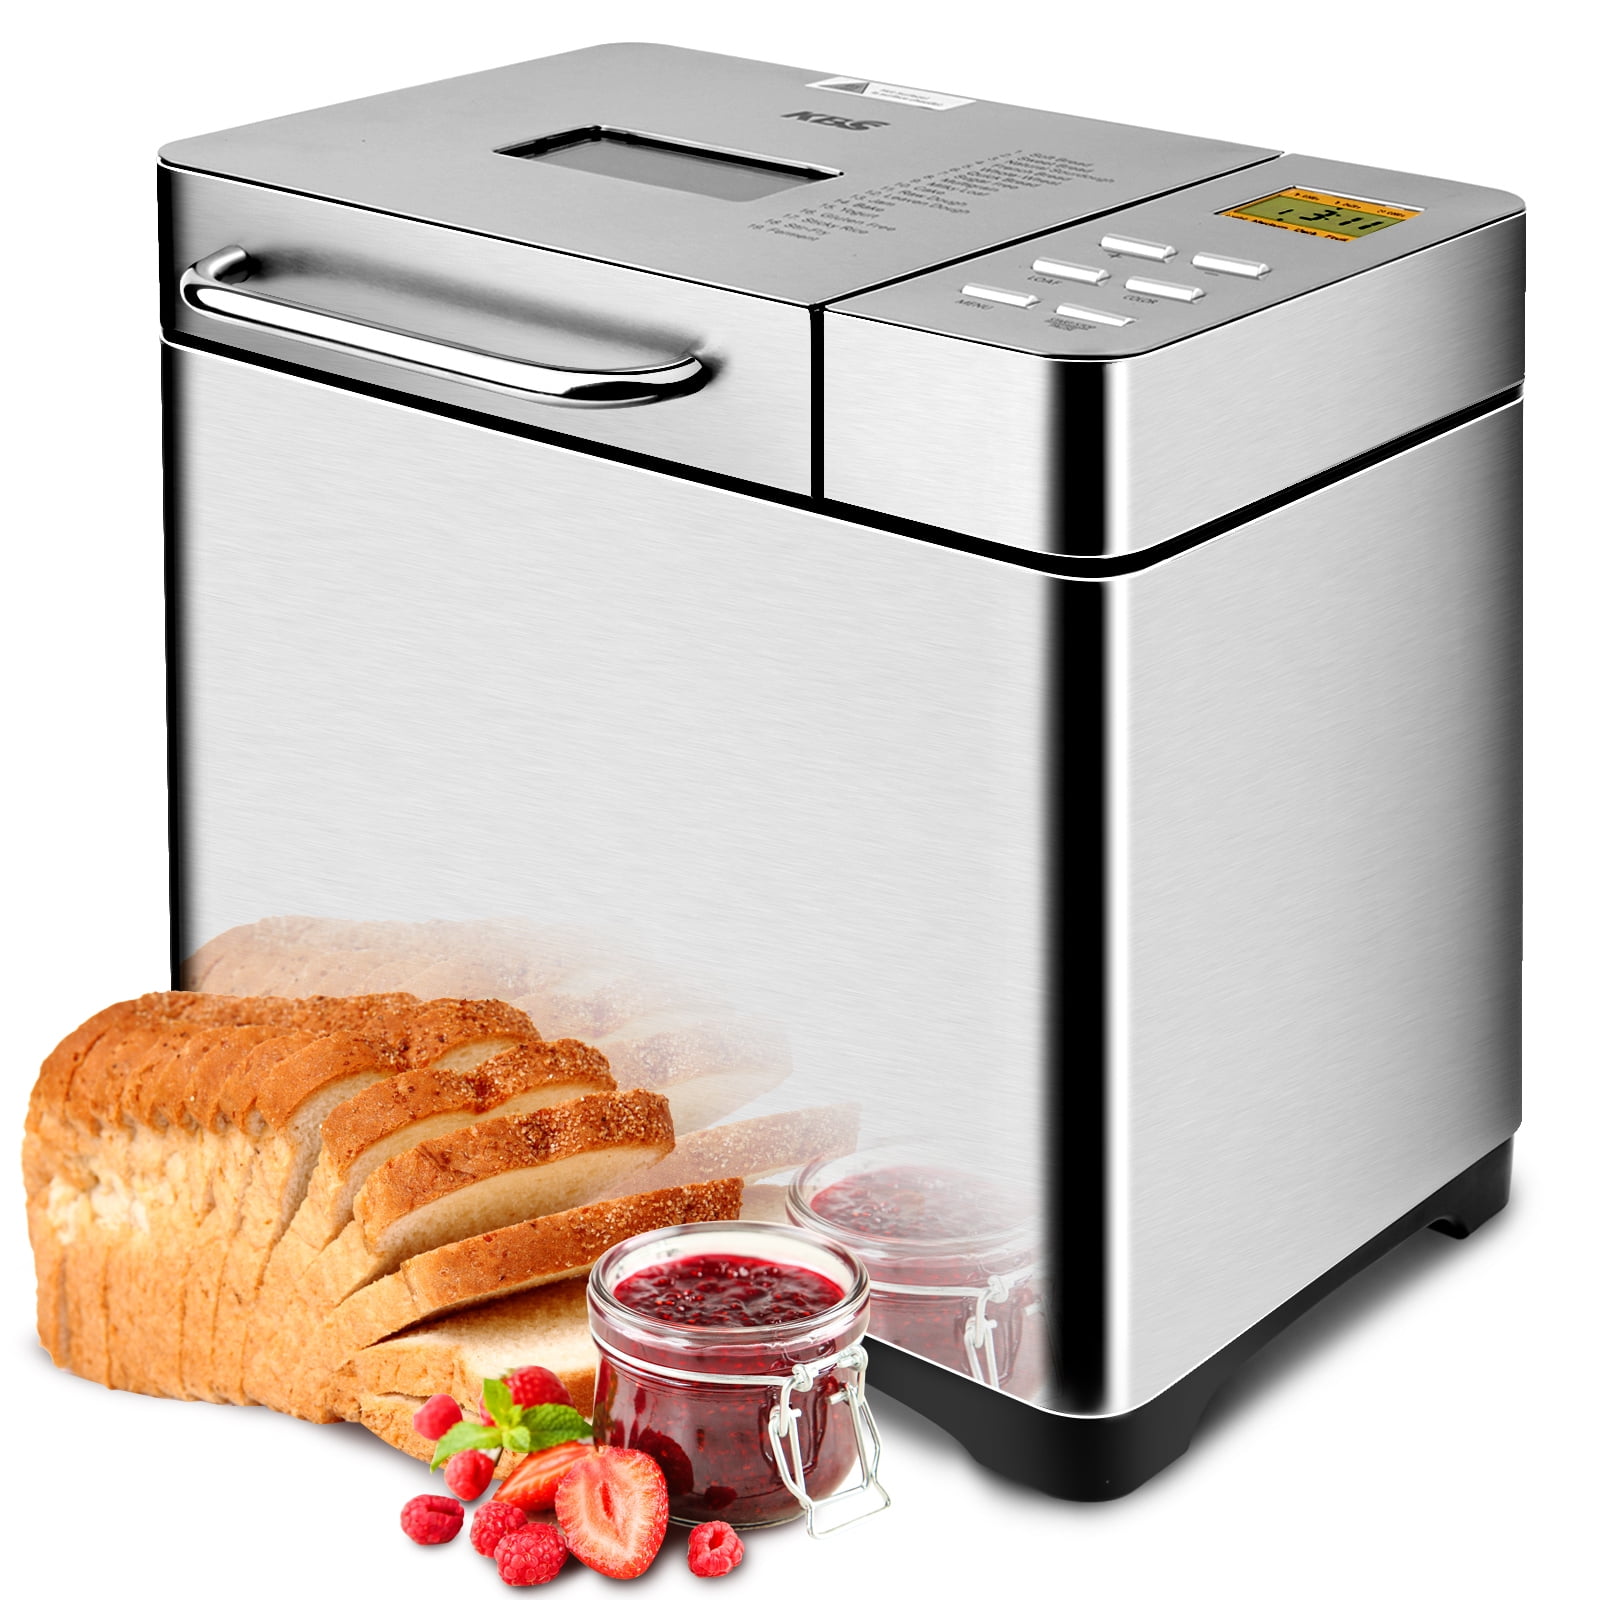 KBS 17-in-1 2LB Bread Maker Machine Fully Automatic LCD Display，Stainless Steel Model# 013